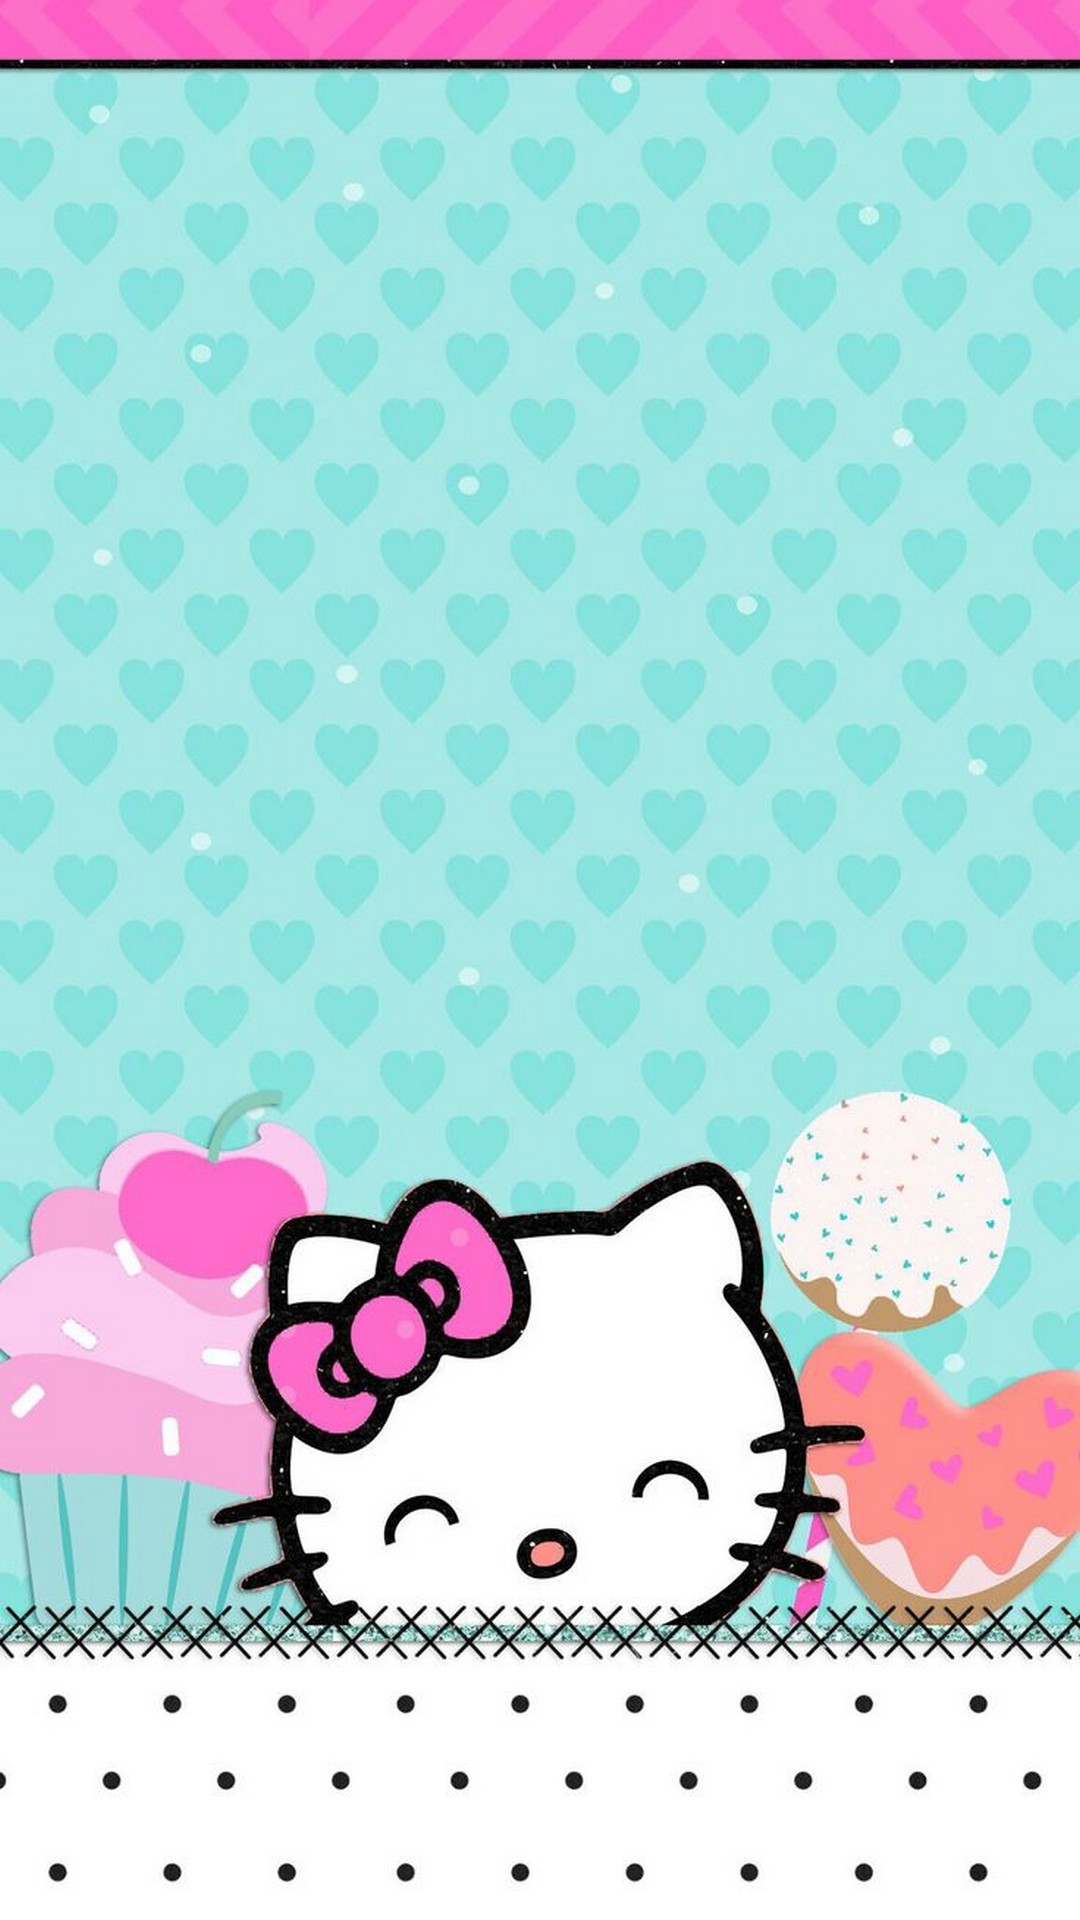 iPhone X Wallpaper Hello Kitty with resolution 1080X1920 pixel. You can make this wallpaper for your iPhone 5, 6, 7, 8, X backgrounds, Mobile Screensaver, or iPad Lock Screen